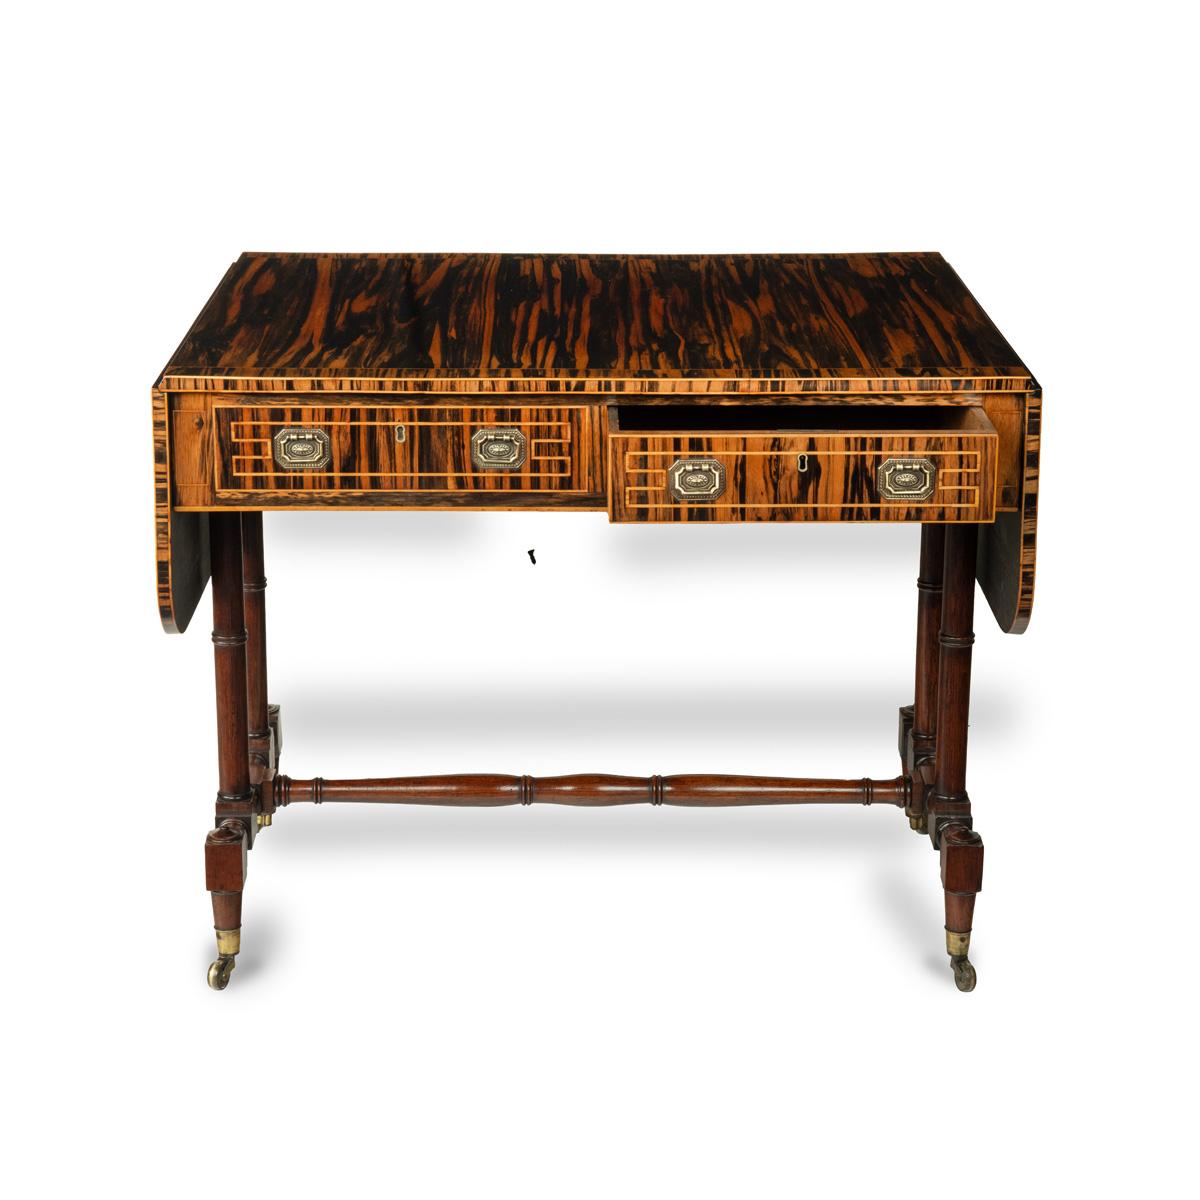 A striking Regency coromandel sofa table, of typical rectangular form with two rounded flaps, each side has one frieze drawer and one dummy drawer, with turned double column supports and stretcher, original castors, decorated throughout with book